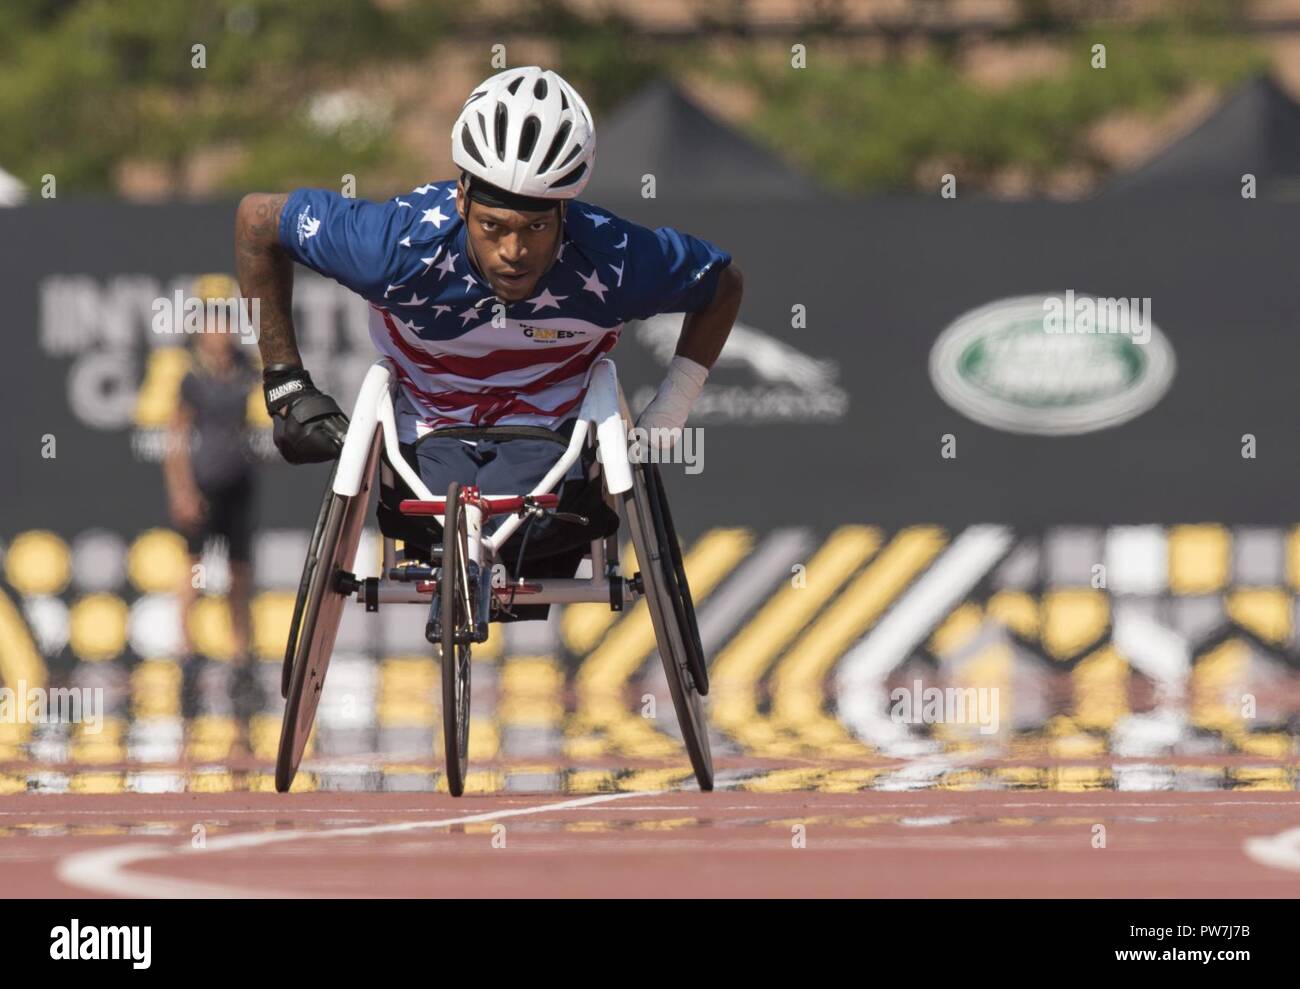 Marine Corps veteran Sgt. Anthony McDaniel competes in wheelchair racing during Athletics at York Lions Stadium during the 2017 Invictus Games in Toronto on September 25, 2017. The Invictus Games, established by Prince Harry in 2014, brings together wounded and injured veterans from 17 nations for 12 adaptive sporting events, including track and field, wheelchair basketball, wheelchair rugby, swimming, sitting volleyball, and new to the 2017 games, golf. Stock Photo